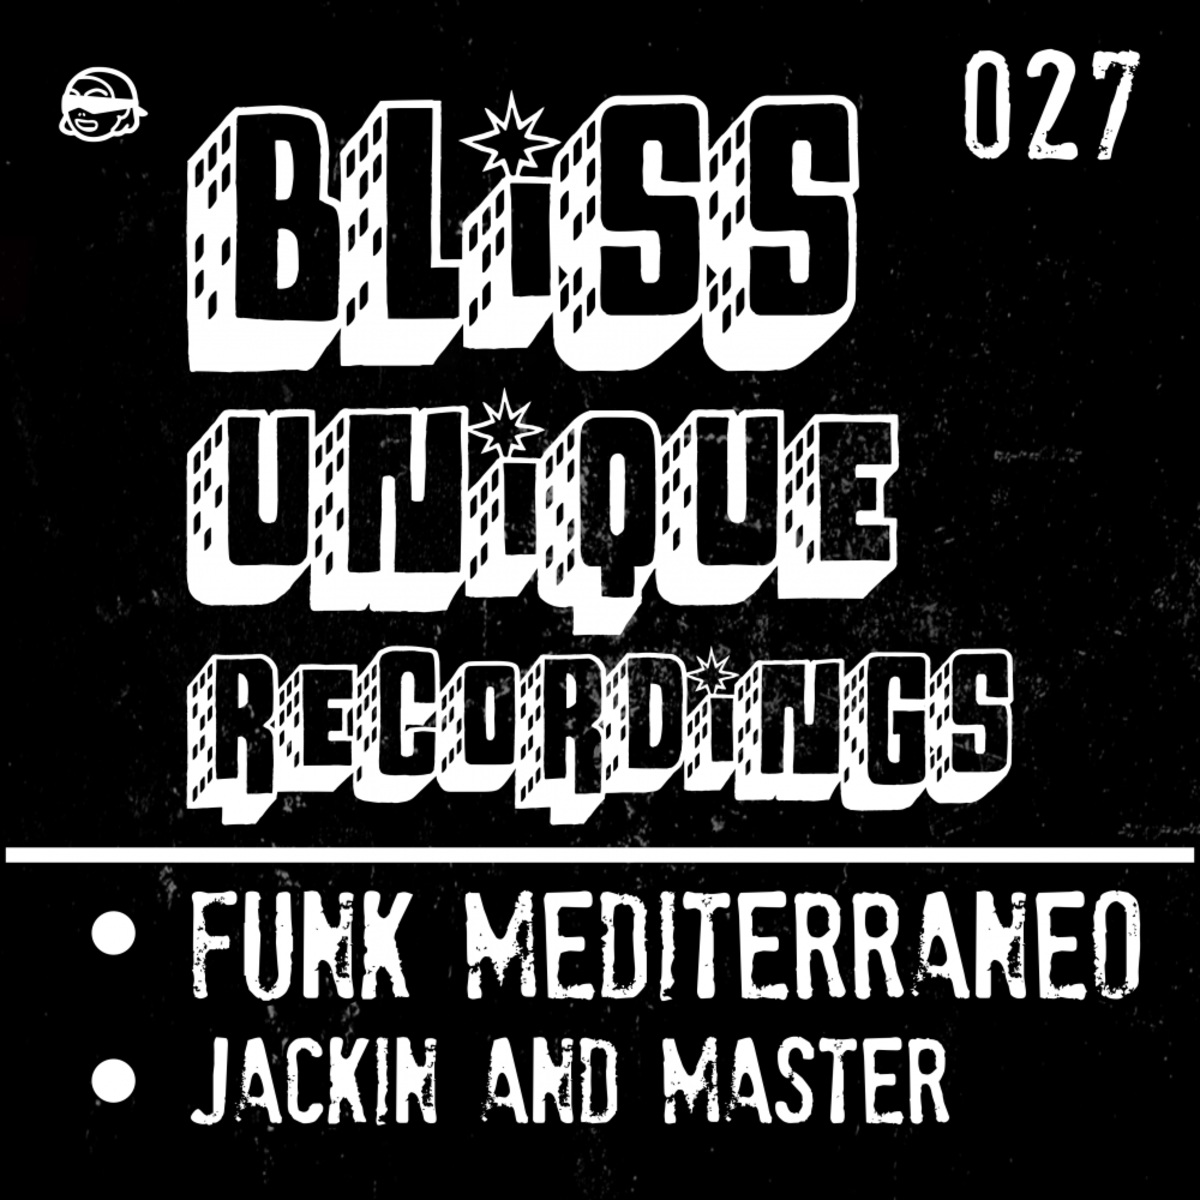 Funk Mediterraneo - Jackin and Master / Bliss Unique Recordings